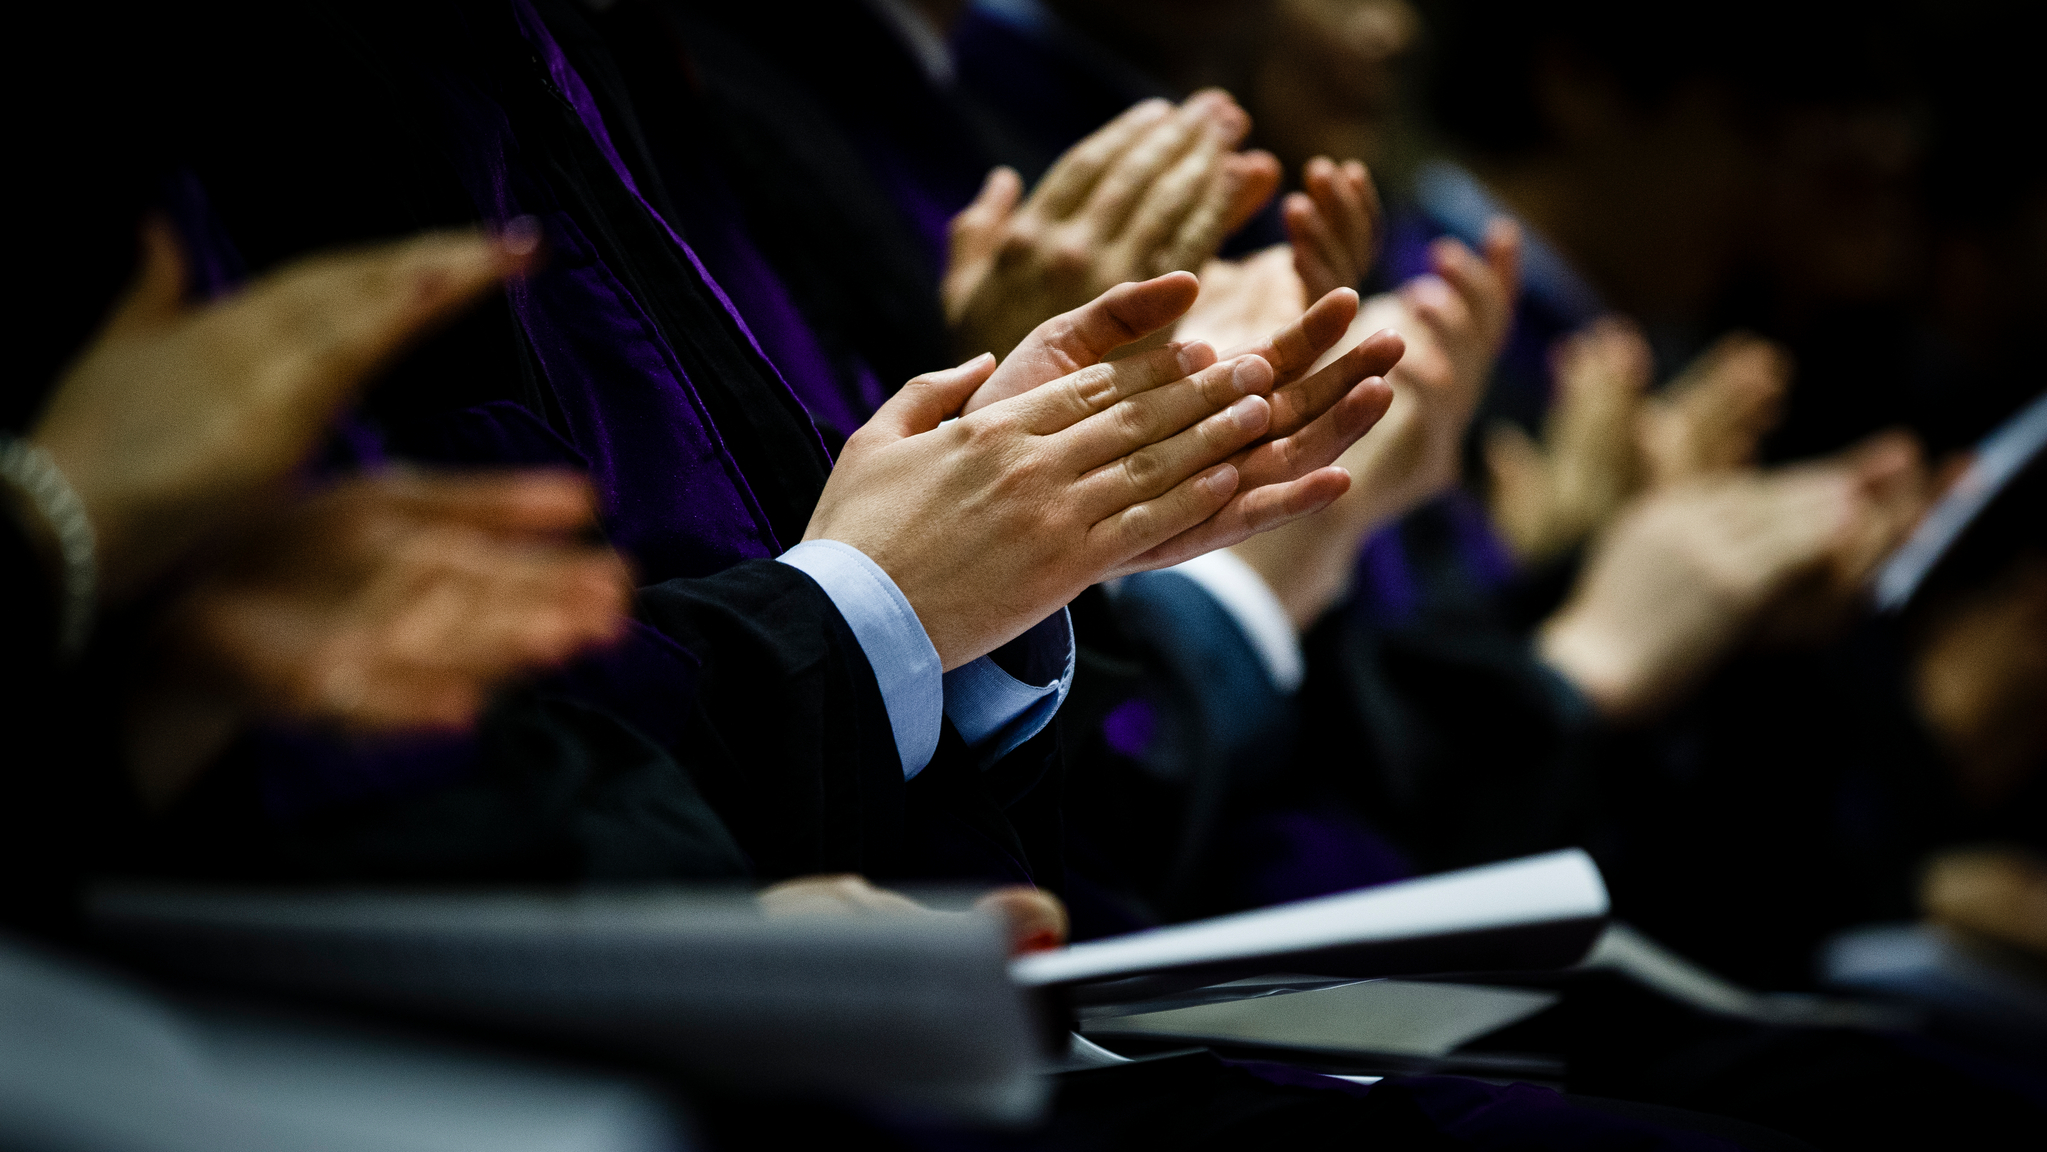 People clapping during a speech at a ceremony